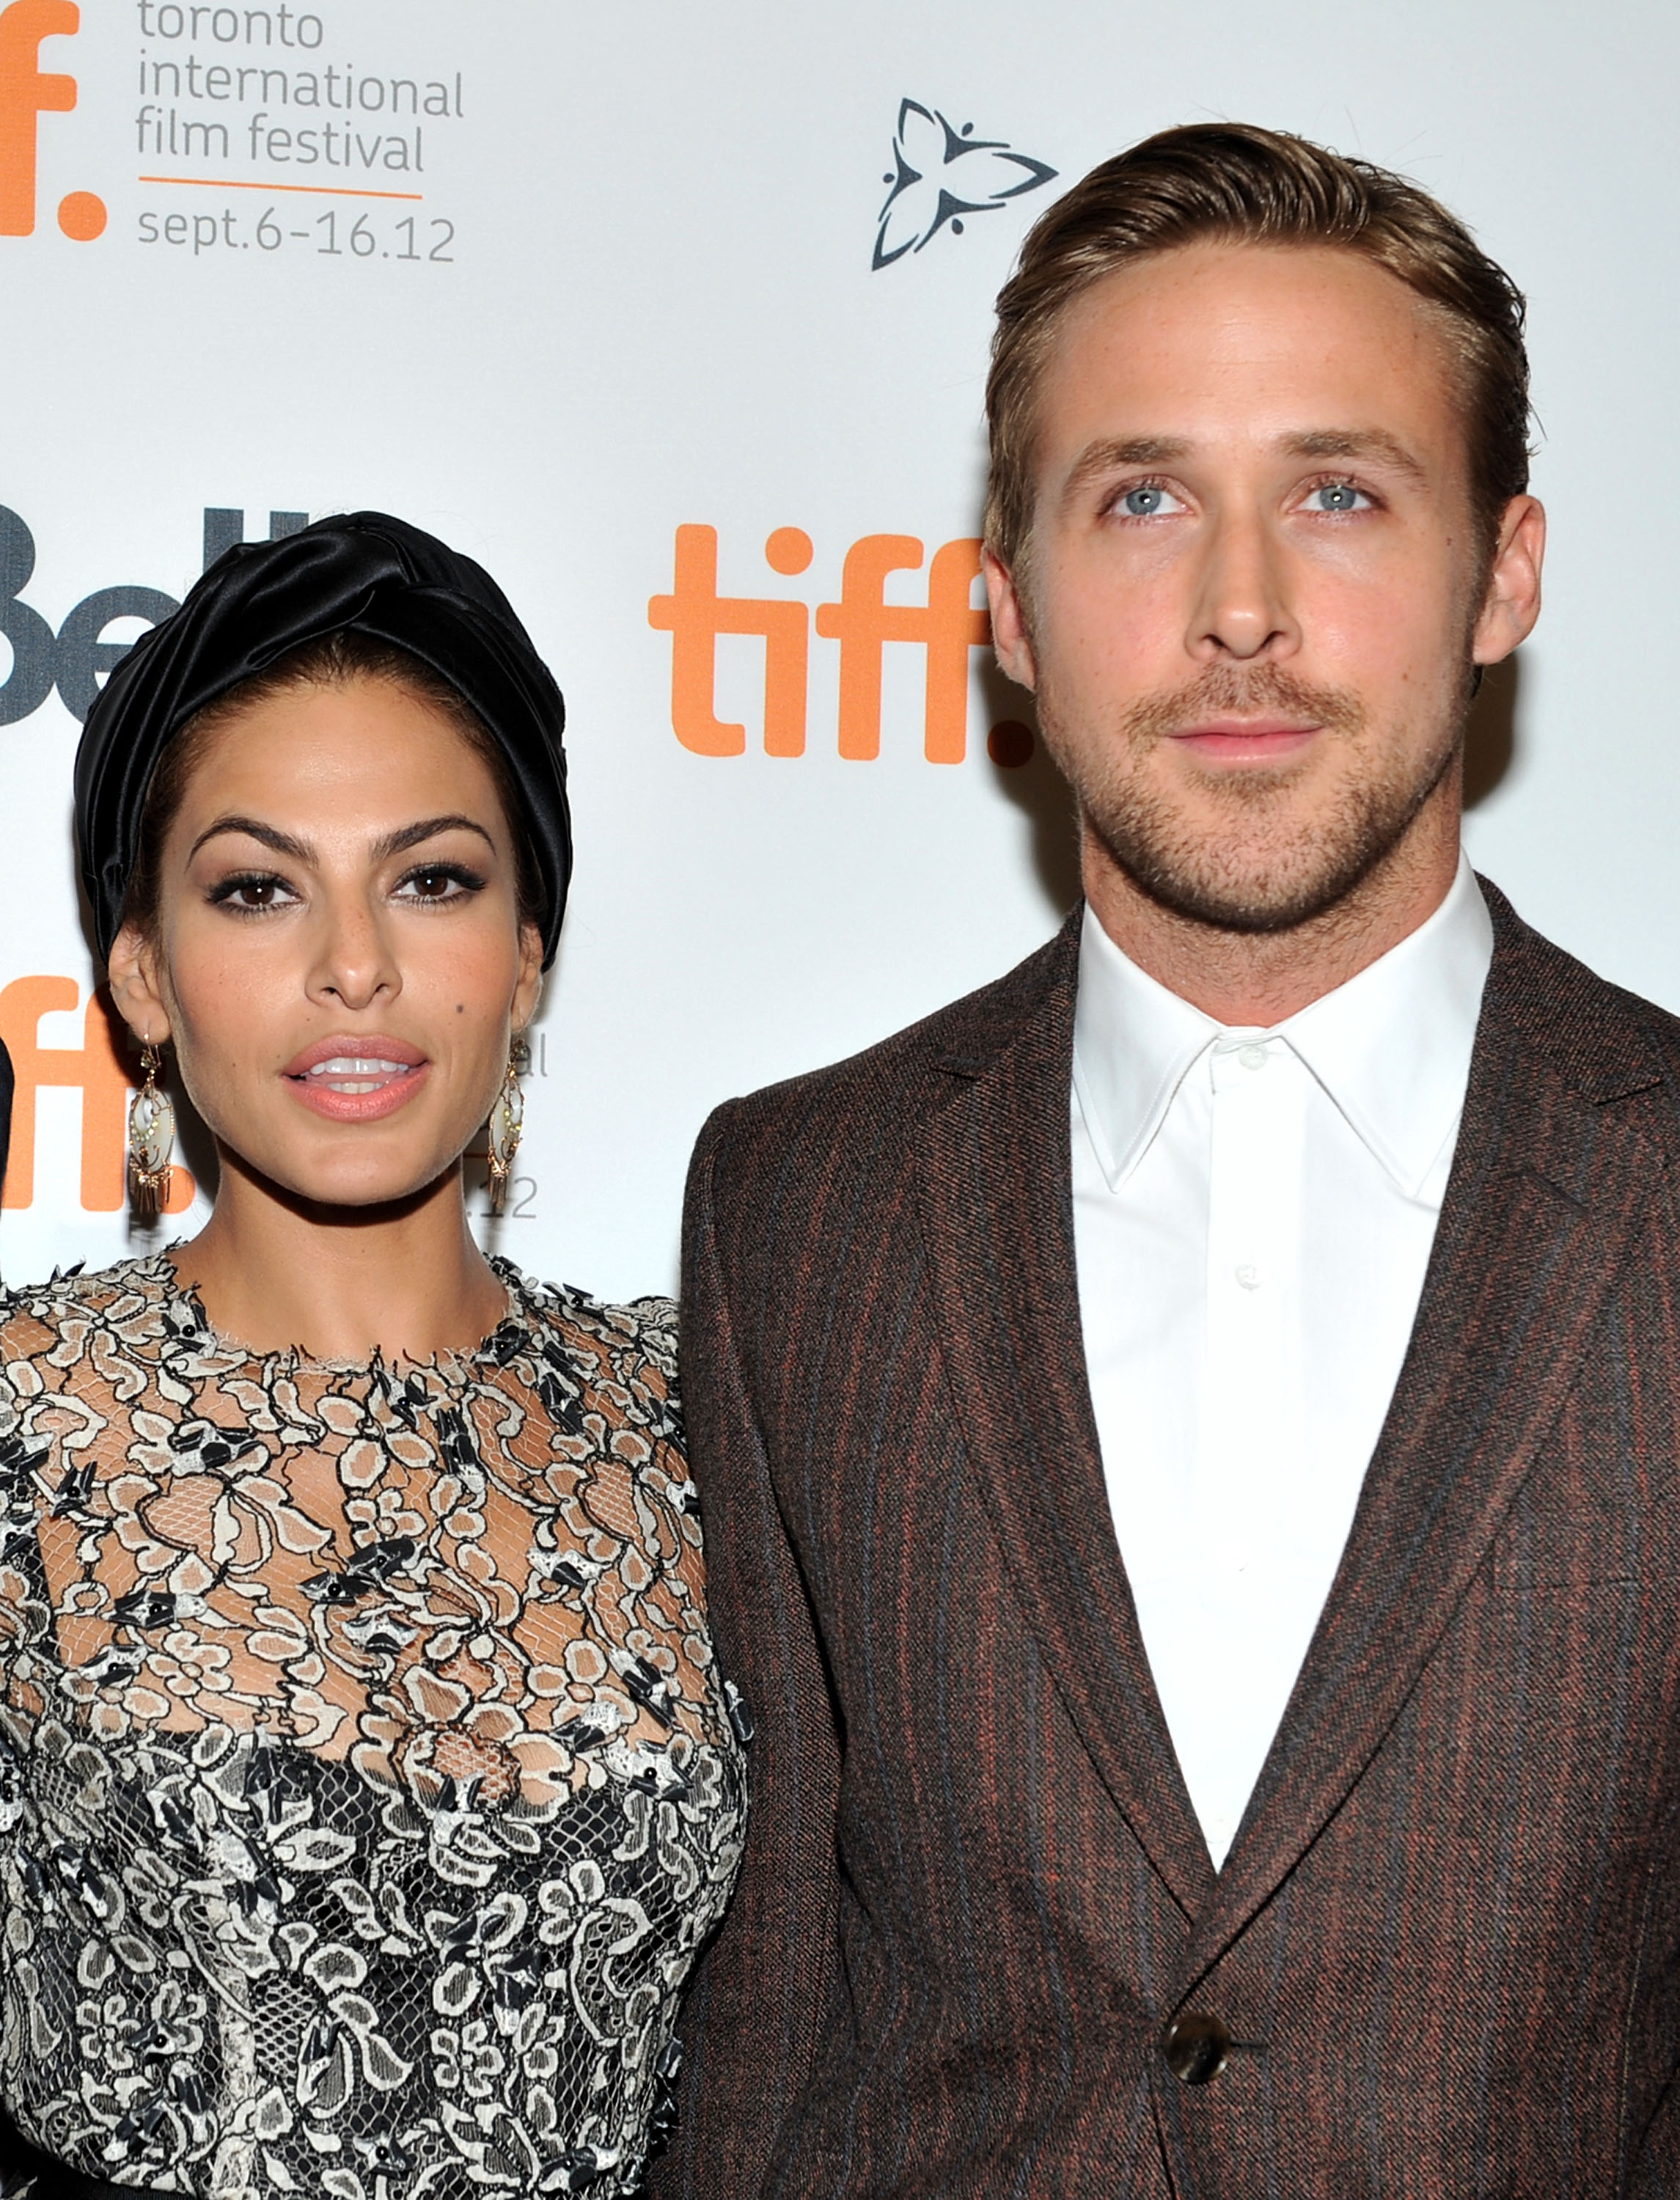 Eva Mendes and Ryan Gosling at "The Place Beyond The Pines" premiere in Toronto in 2012 | Source: Getty Images